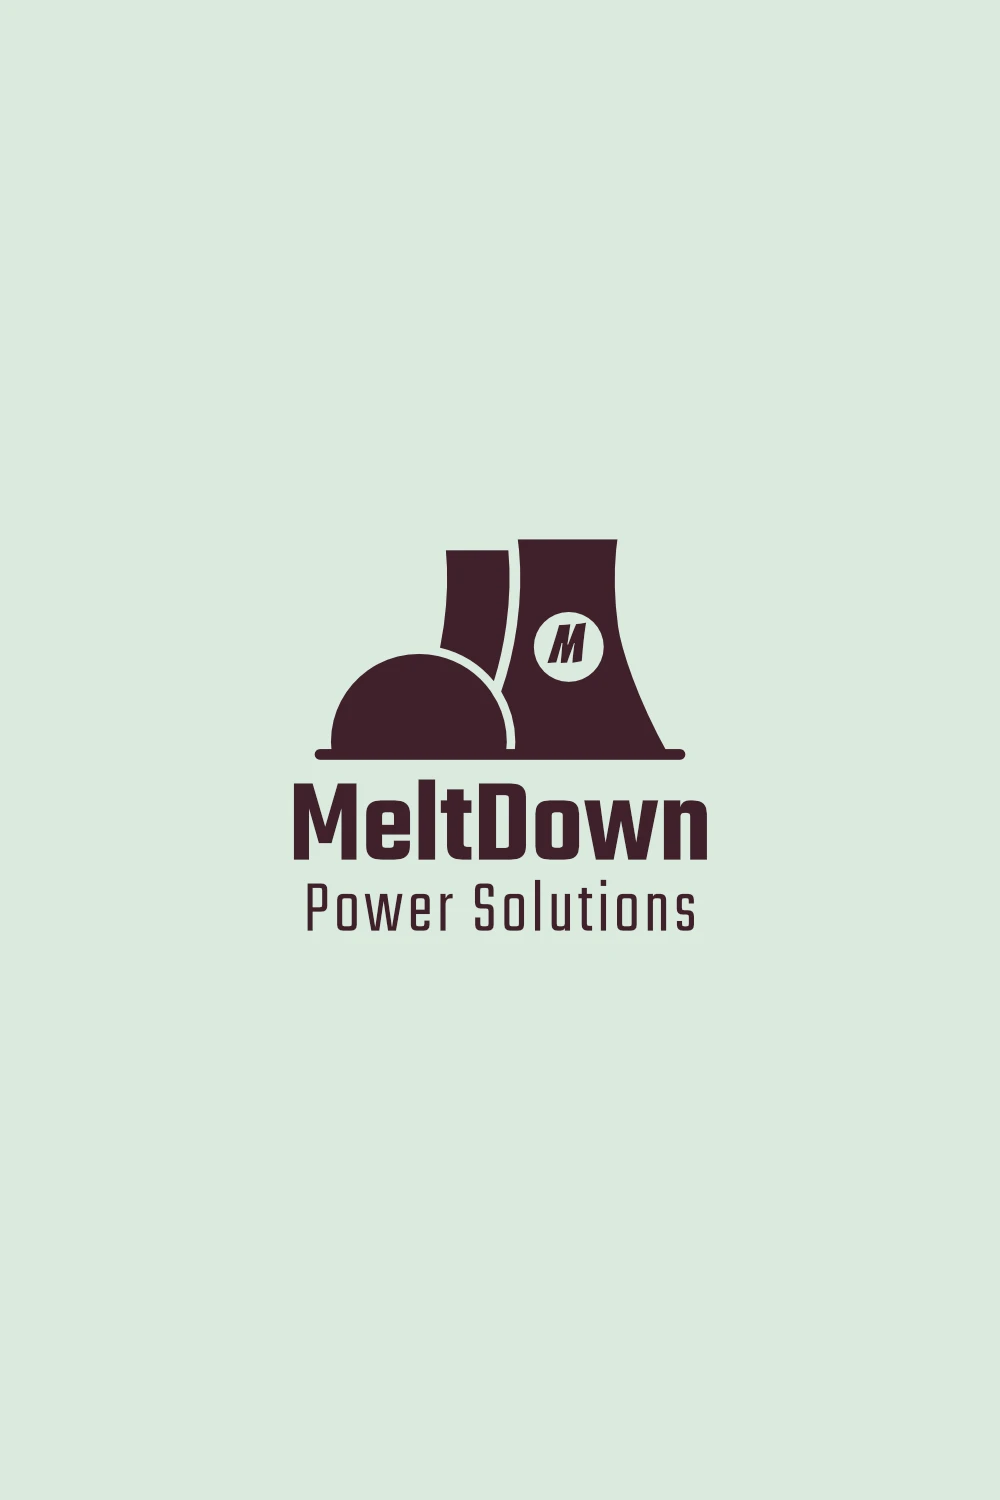 Recognizable Logo Design of a nuclear powerplant with the letter "M" and the text Meltdown Power Solutions"